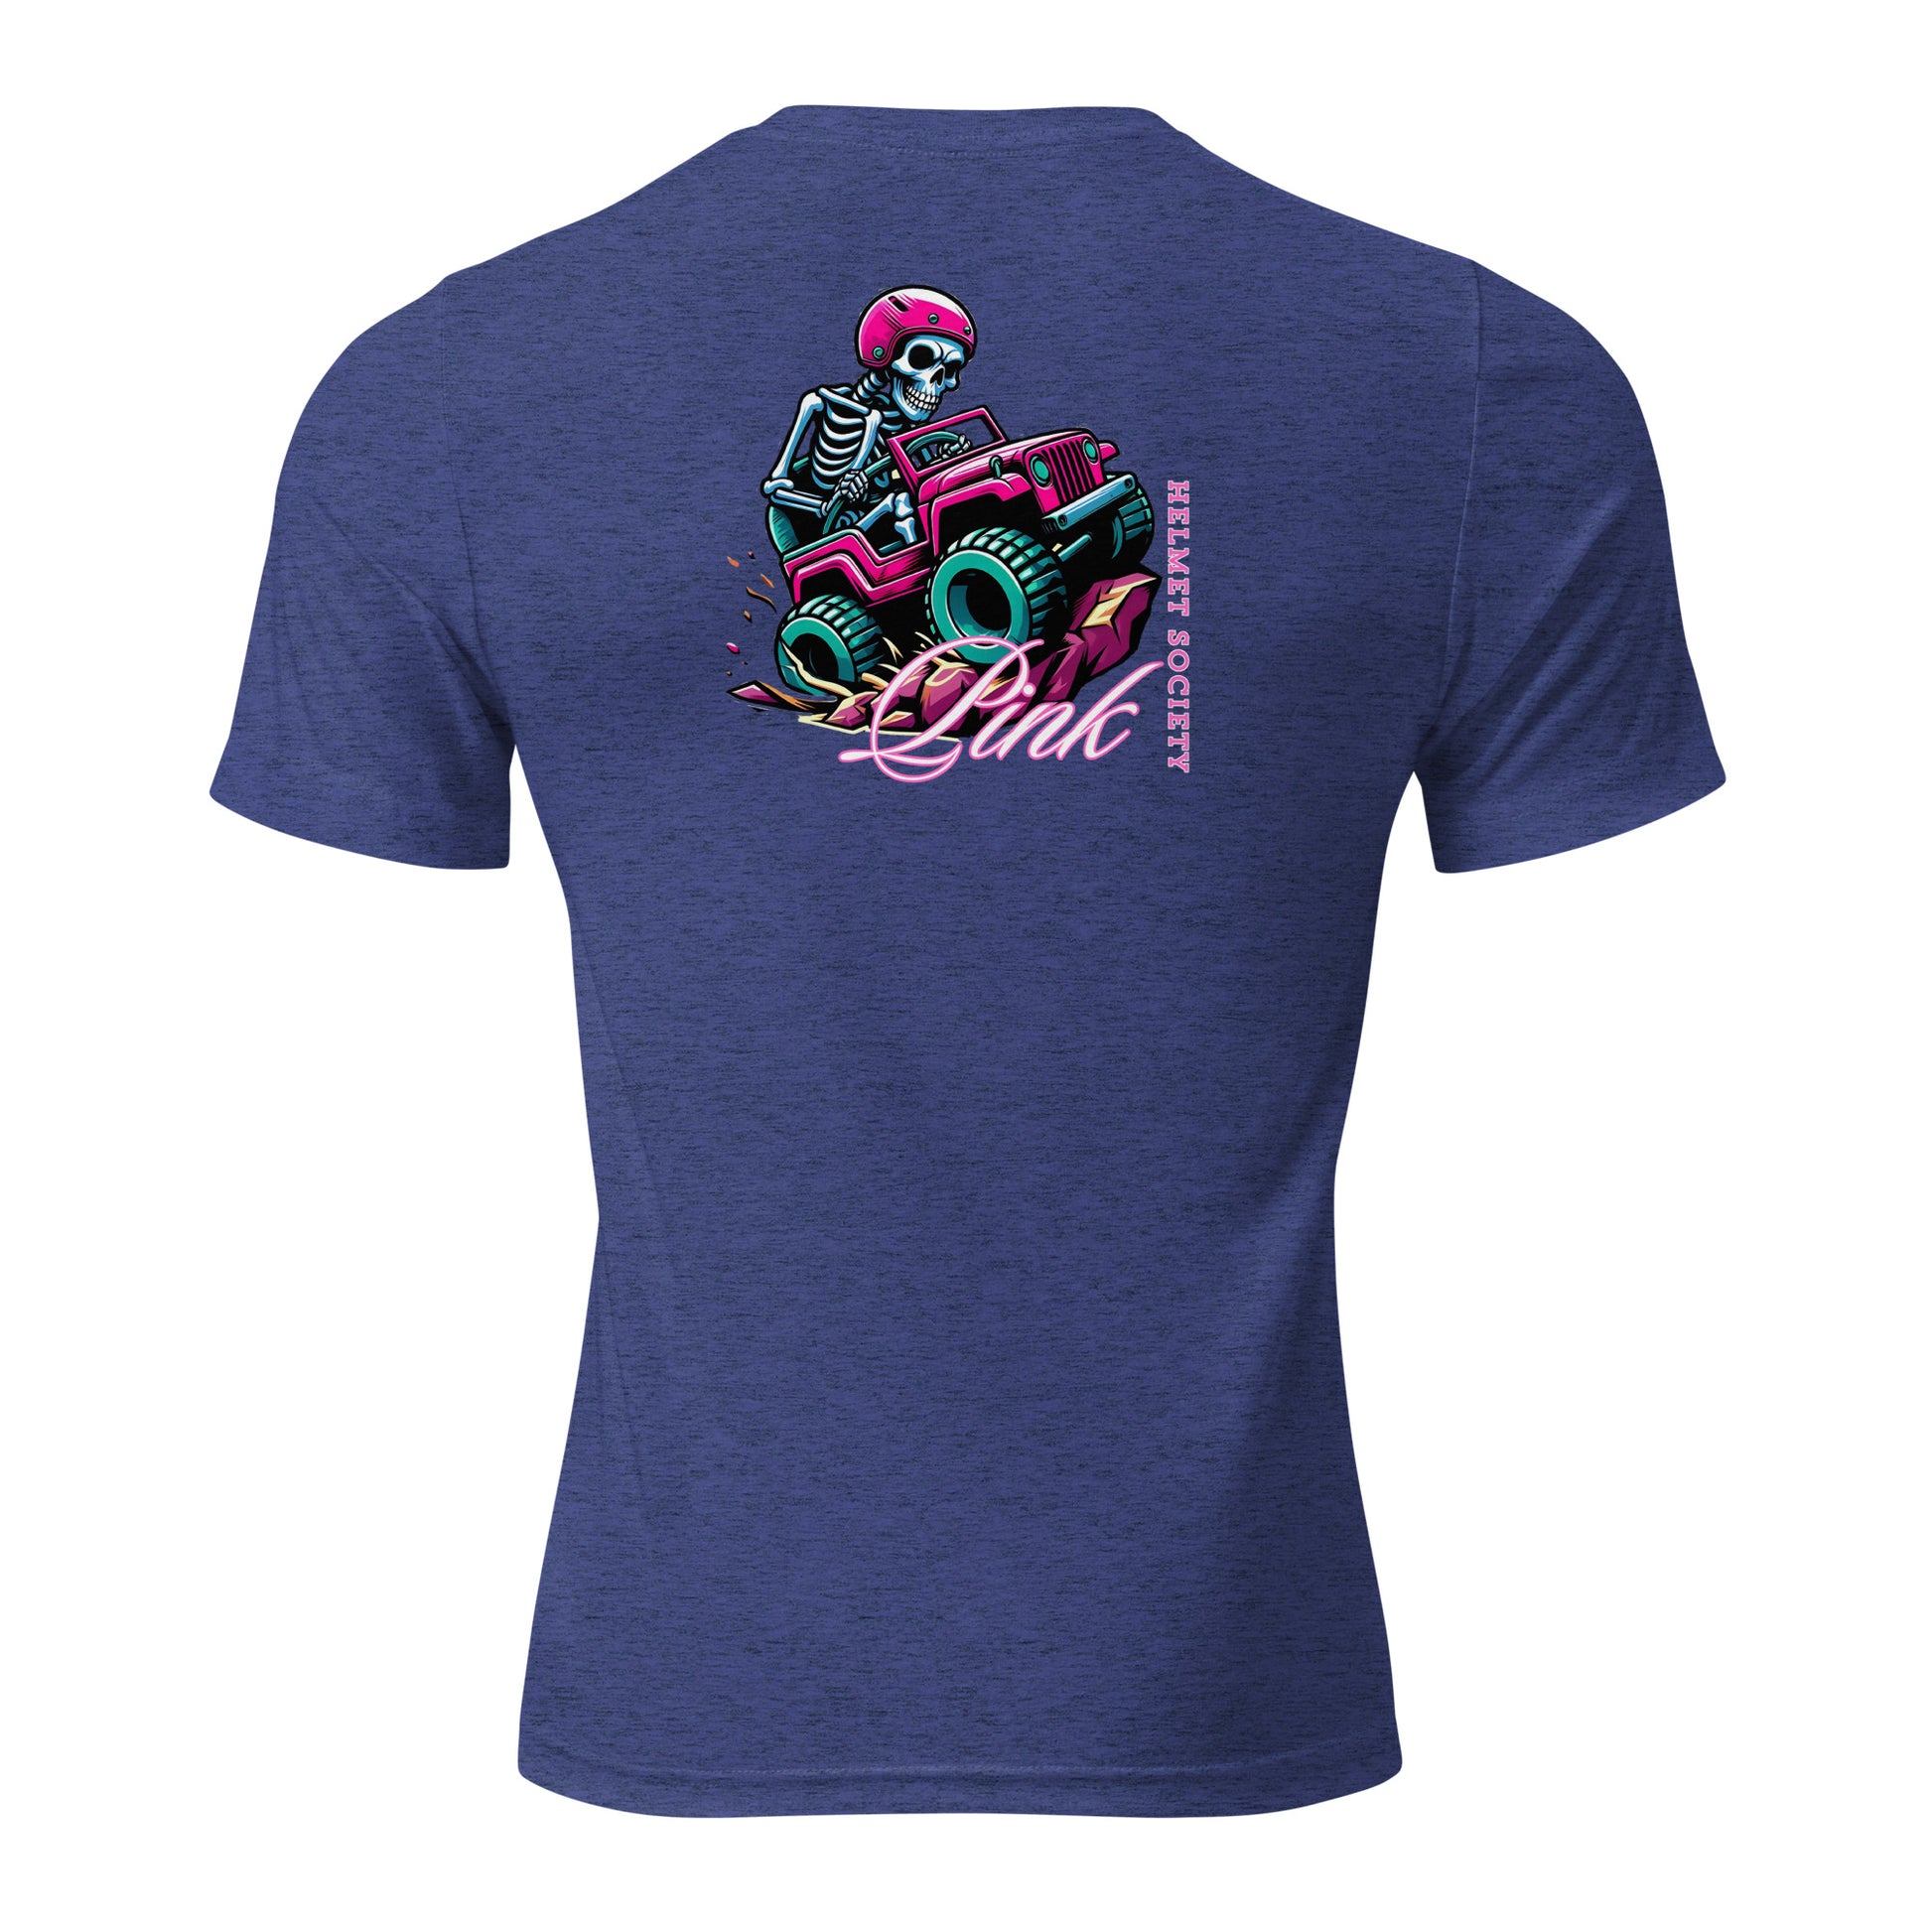 a t - shirt with a skeleton riding a monster truck